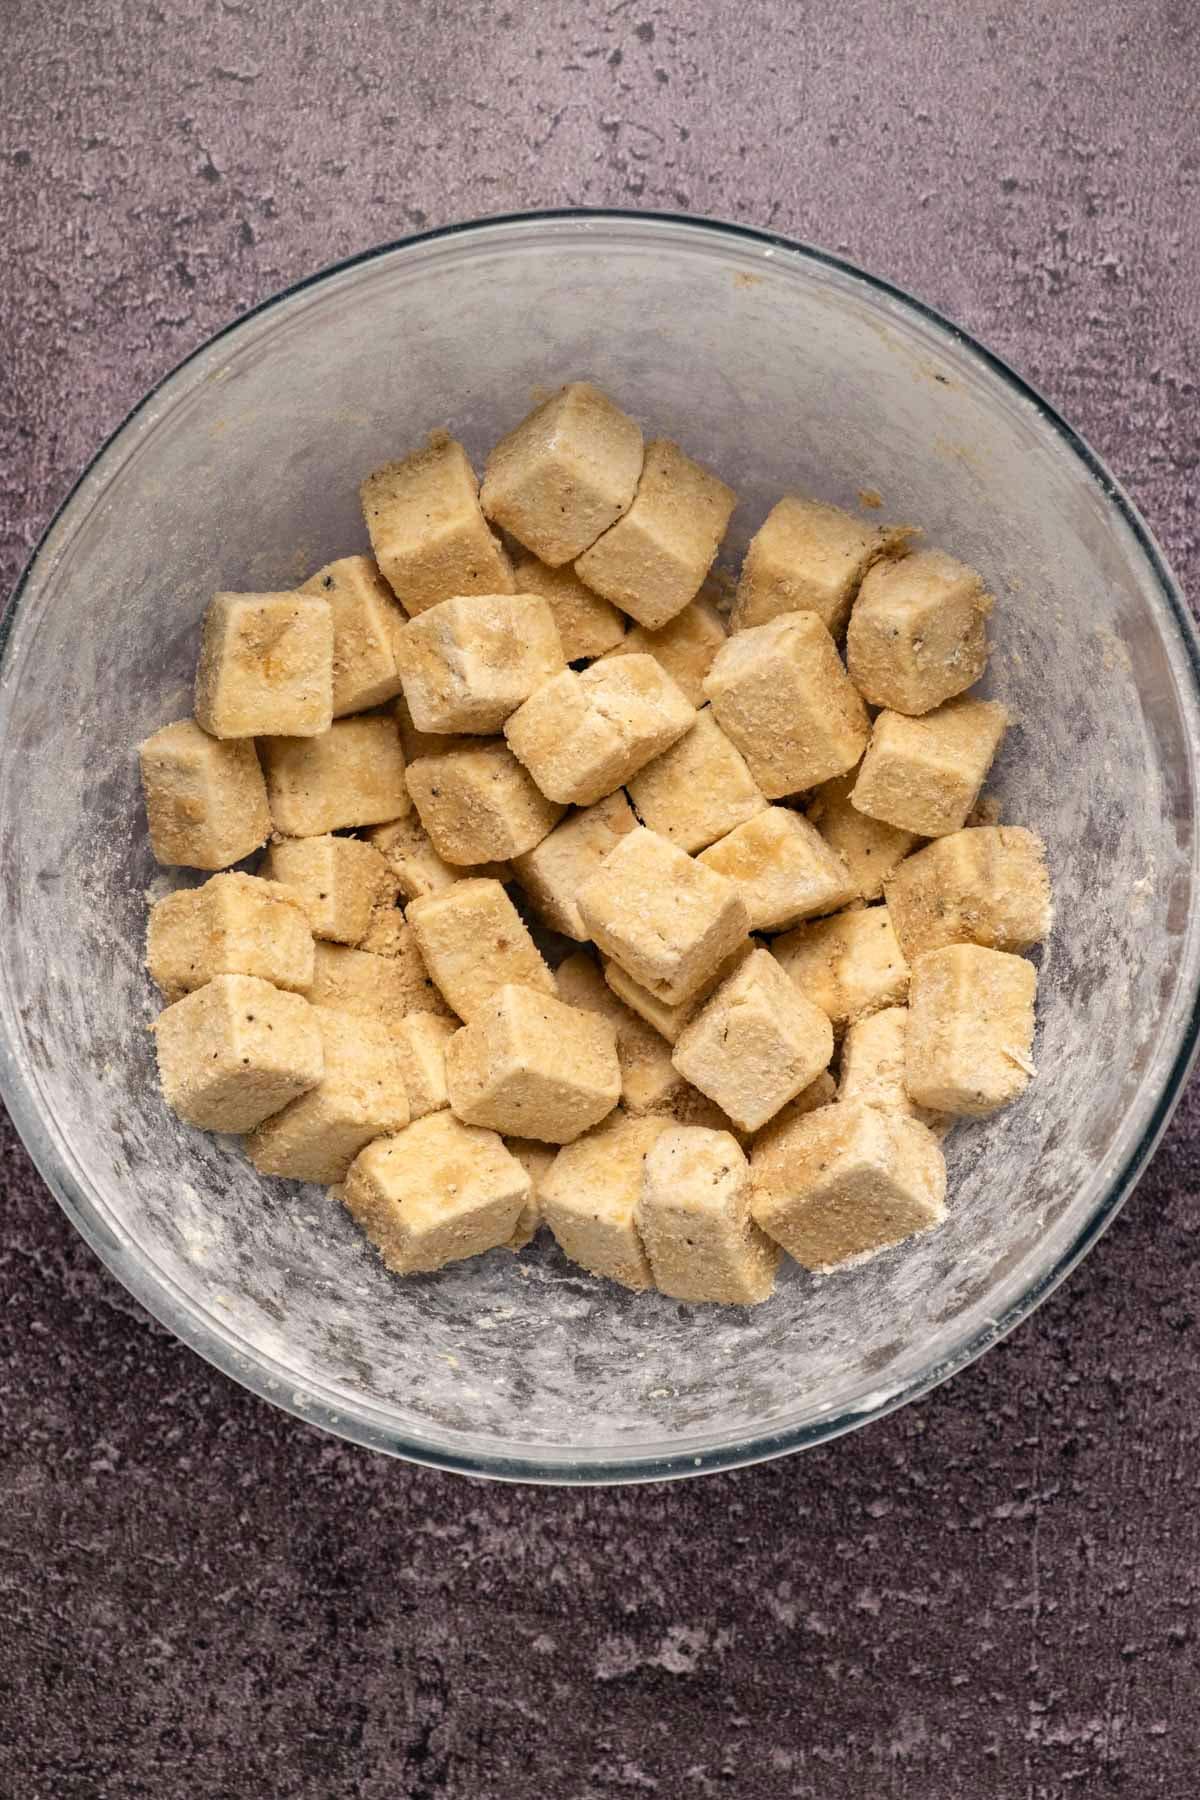 Tofu and spices in a mixing bowl.